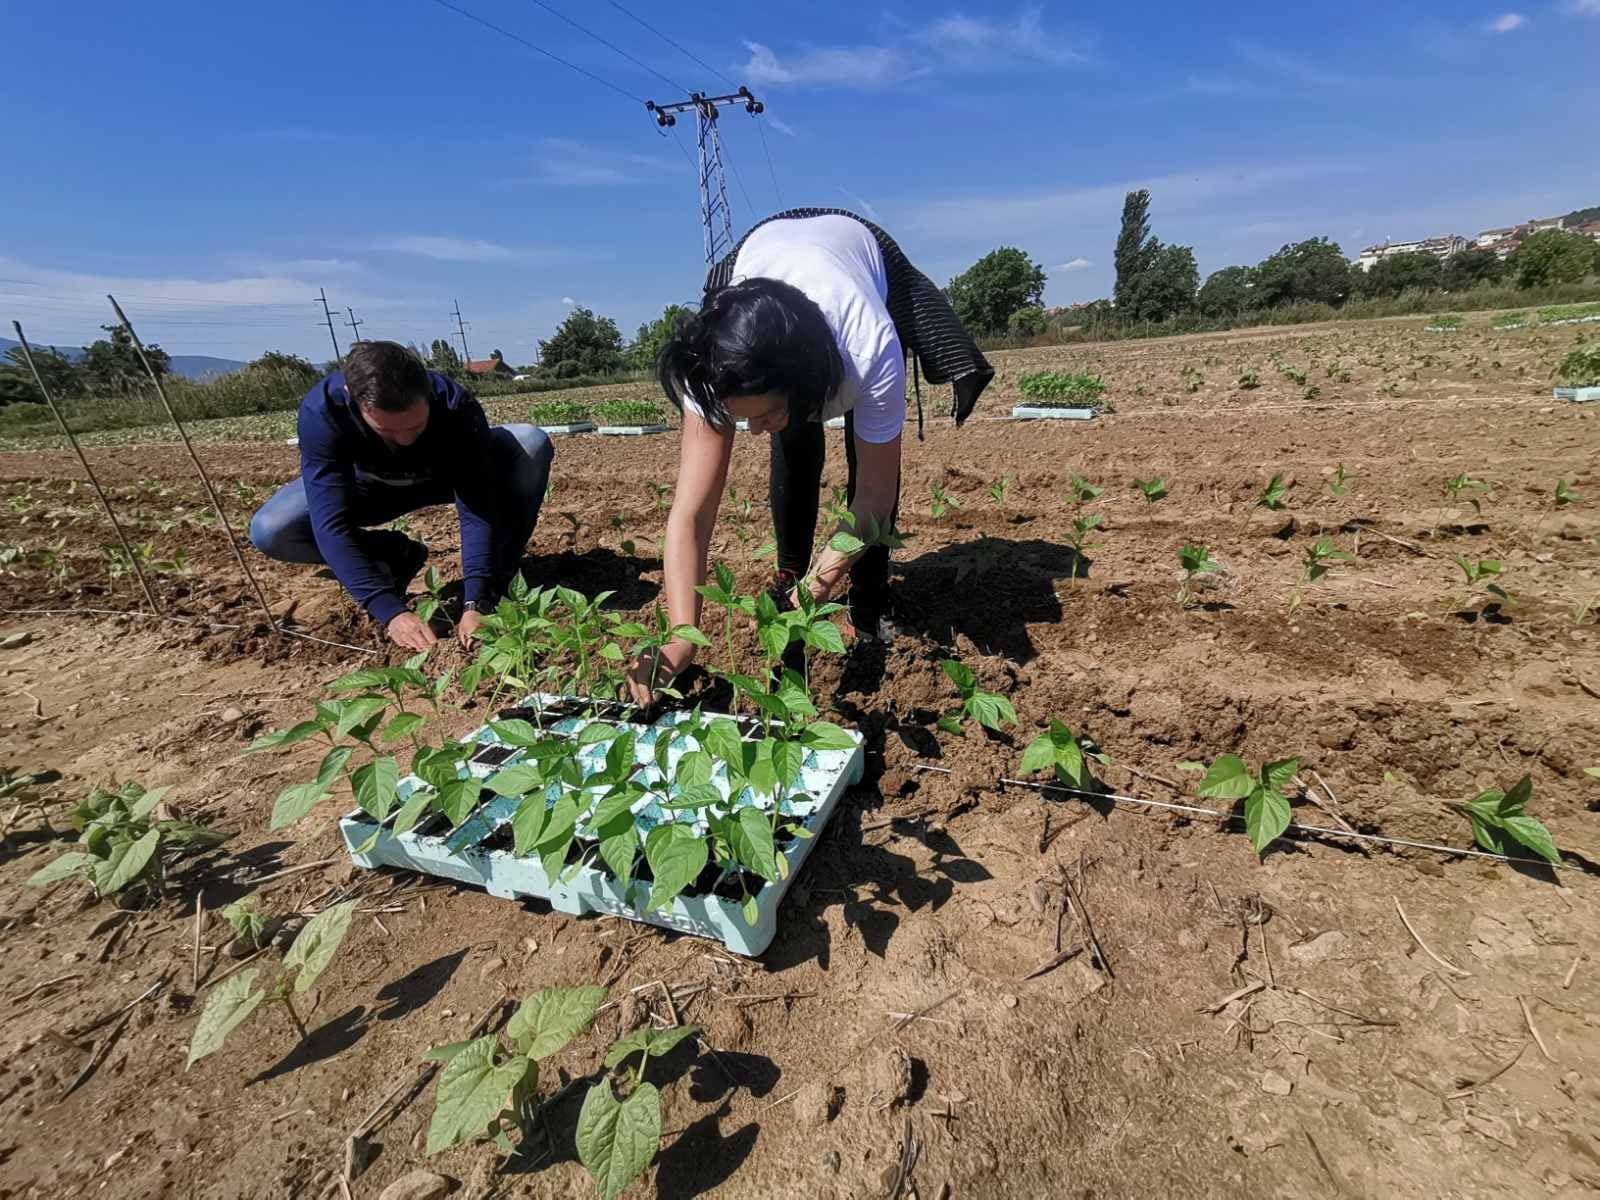 North Macedonia’s agriculture becomes more climate resilient through quality seed production